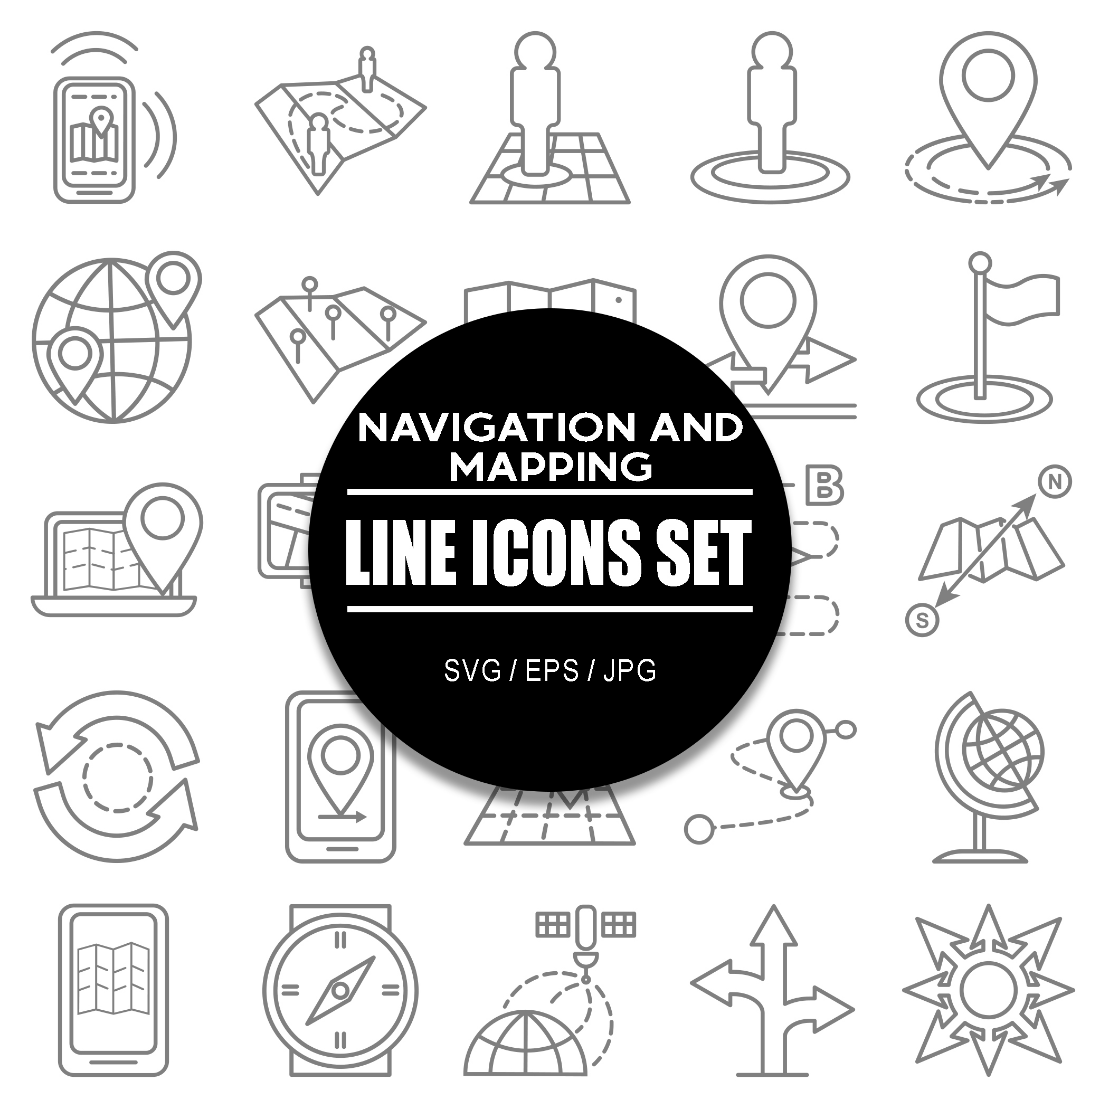 Navigation and Mapping Line Icon Set cover image.